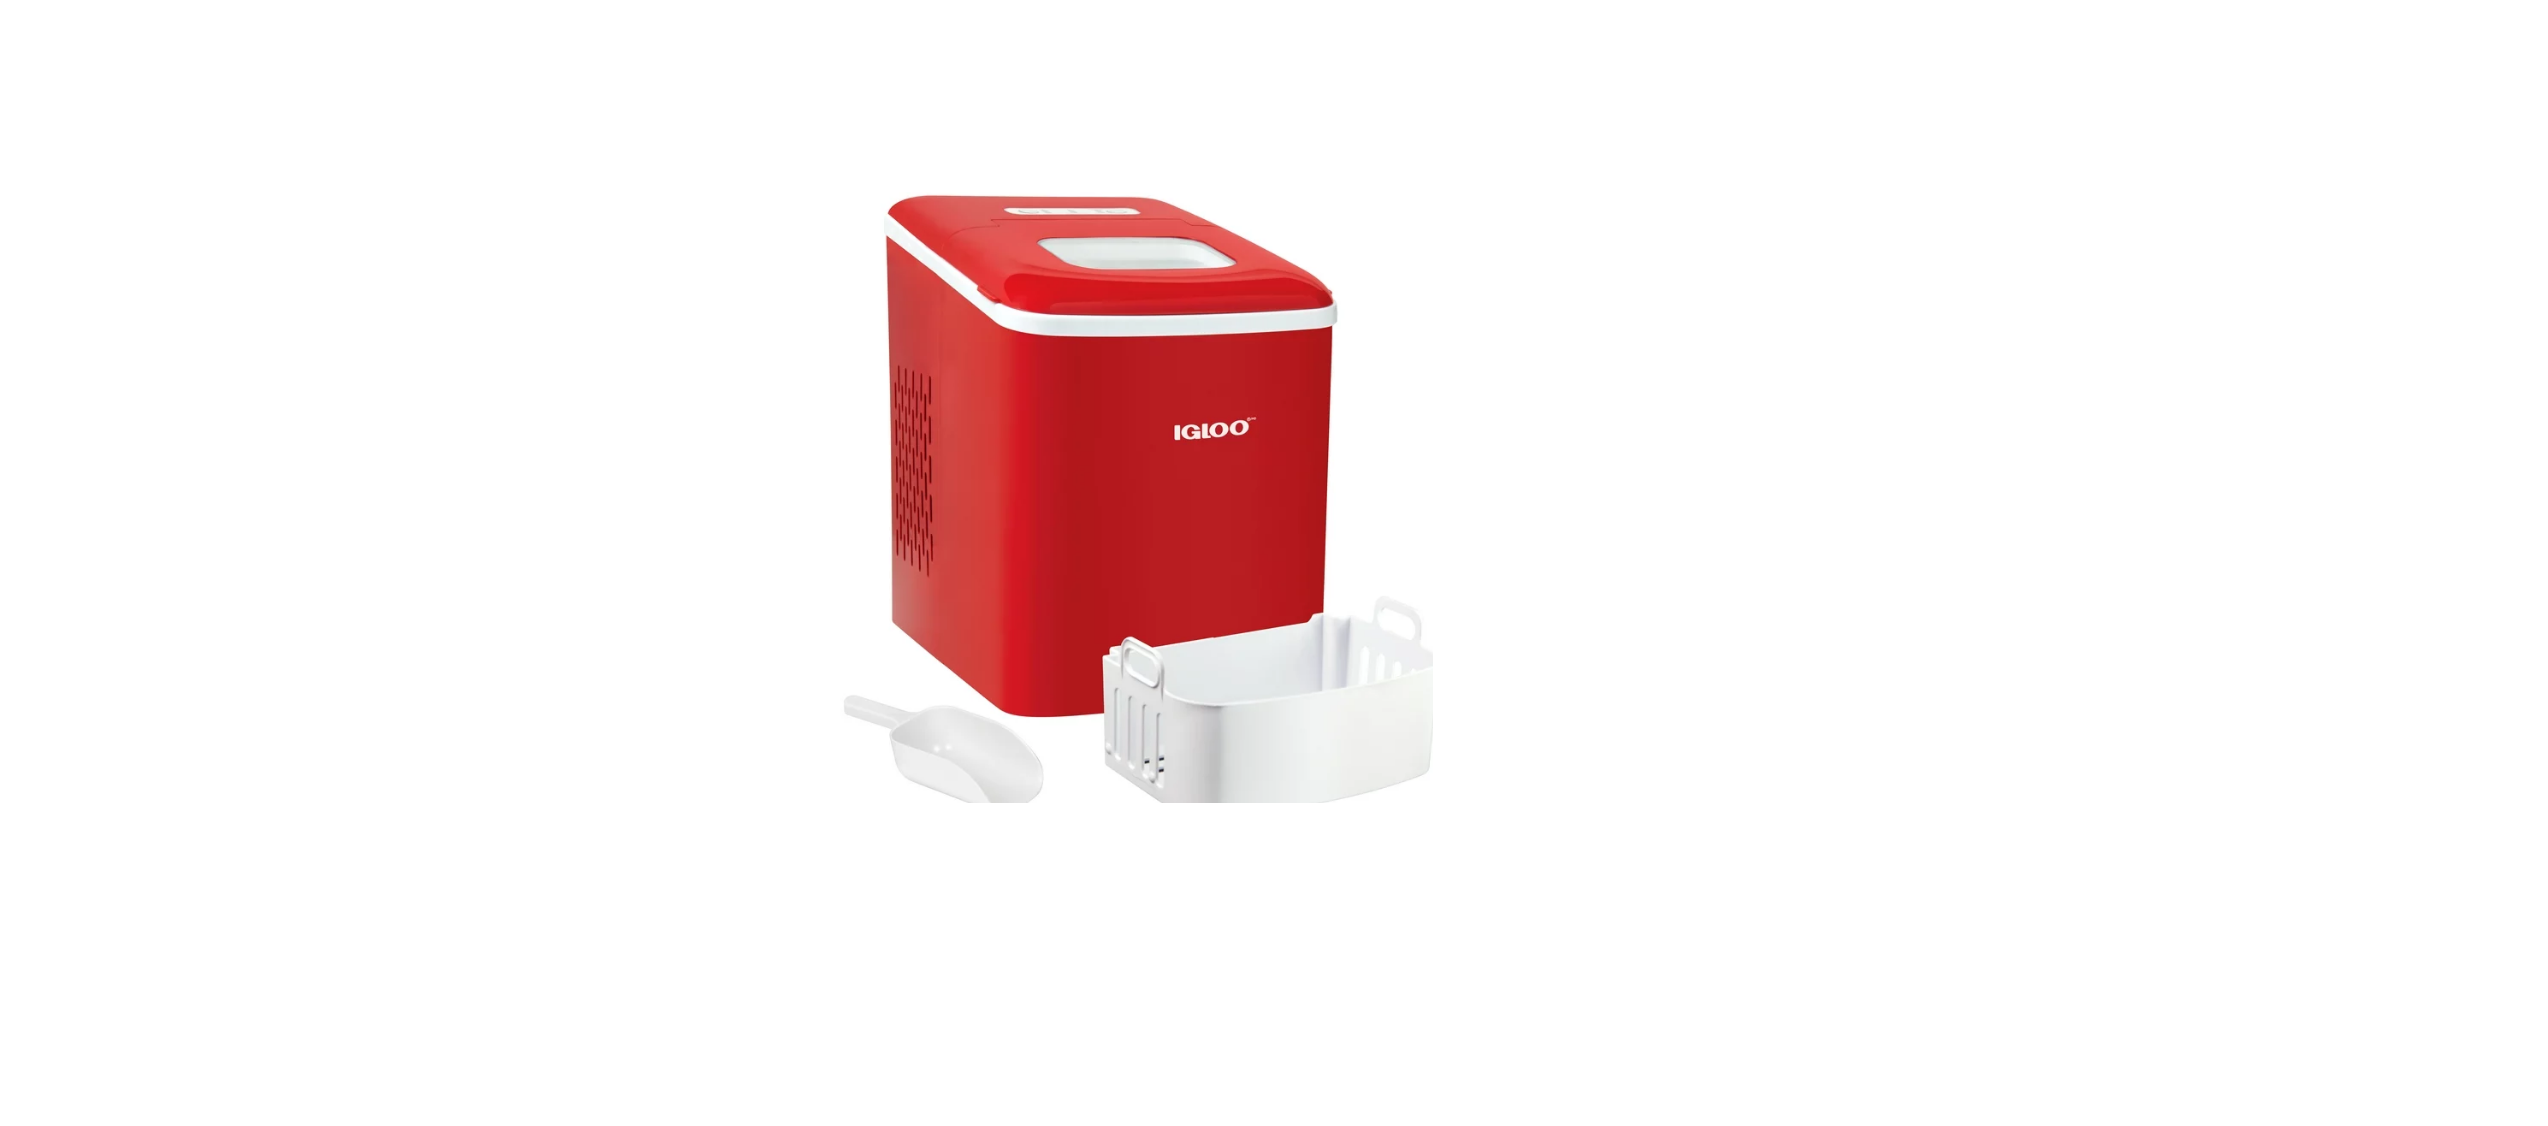 Igloo Automatic Self Cleaning 26 lb Ice Maker, Red